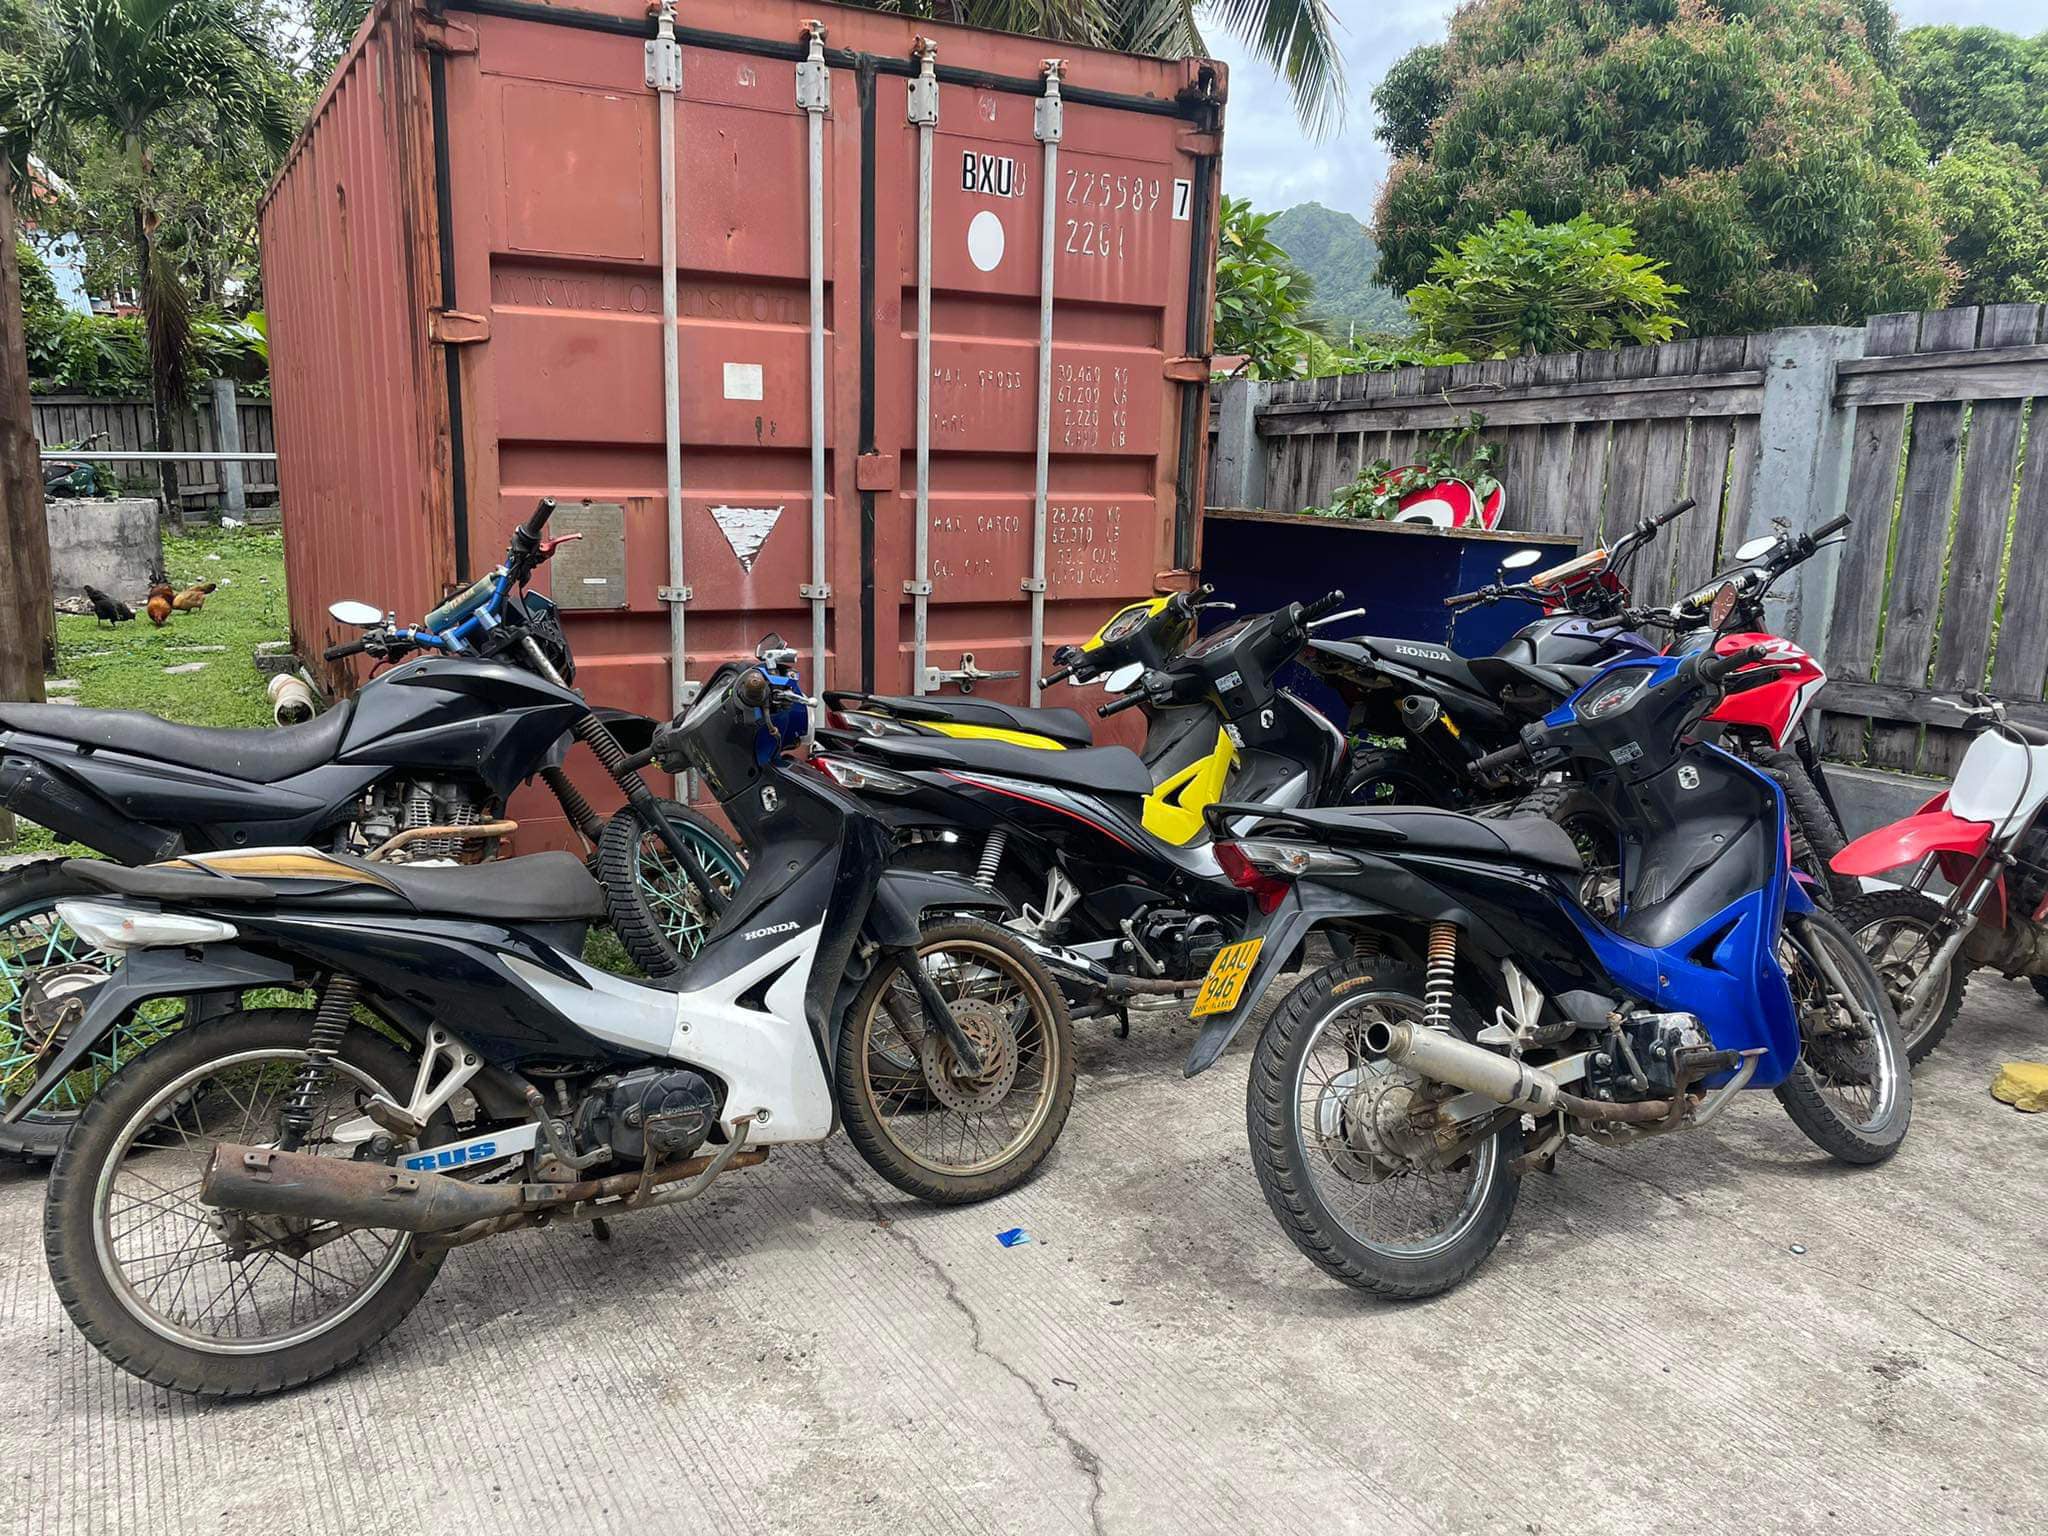 Police enforce tougher stance on non-compliant motorcycle users